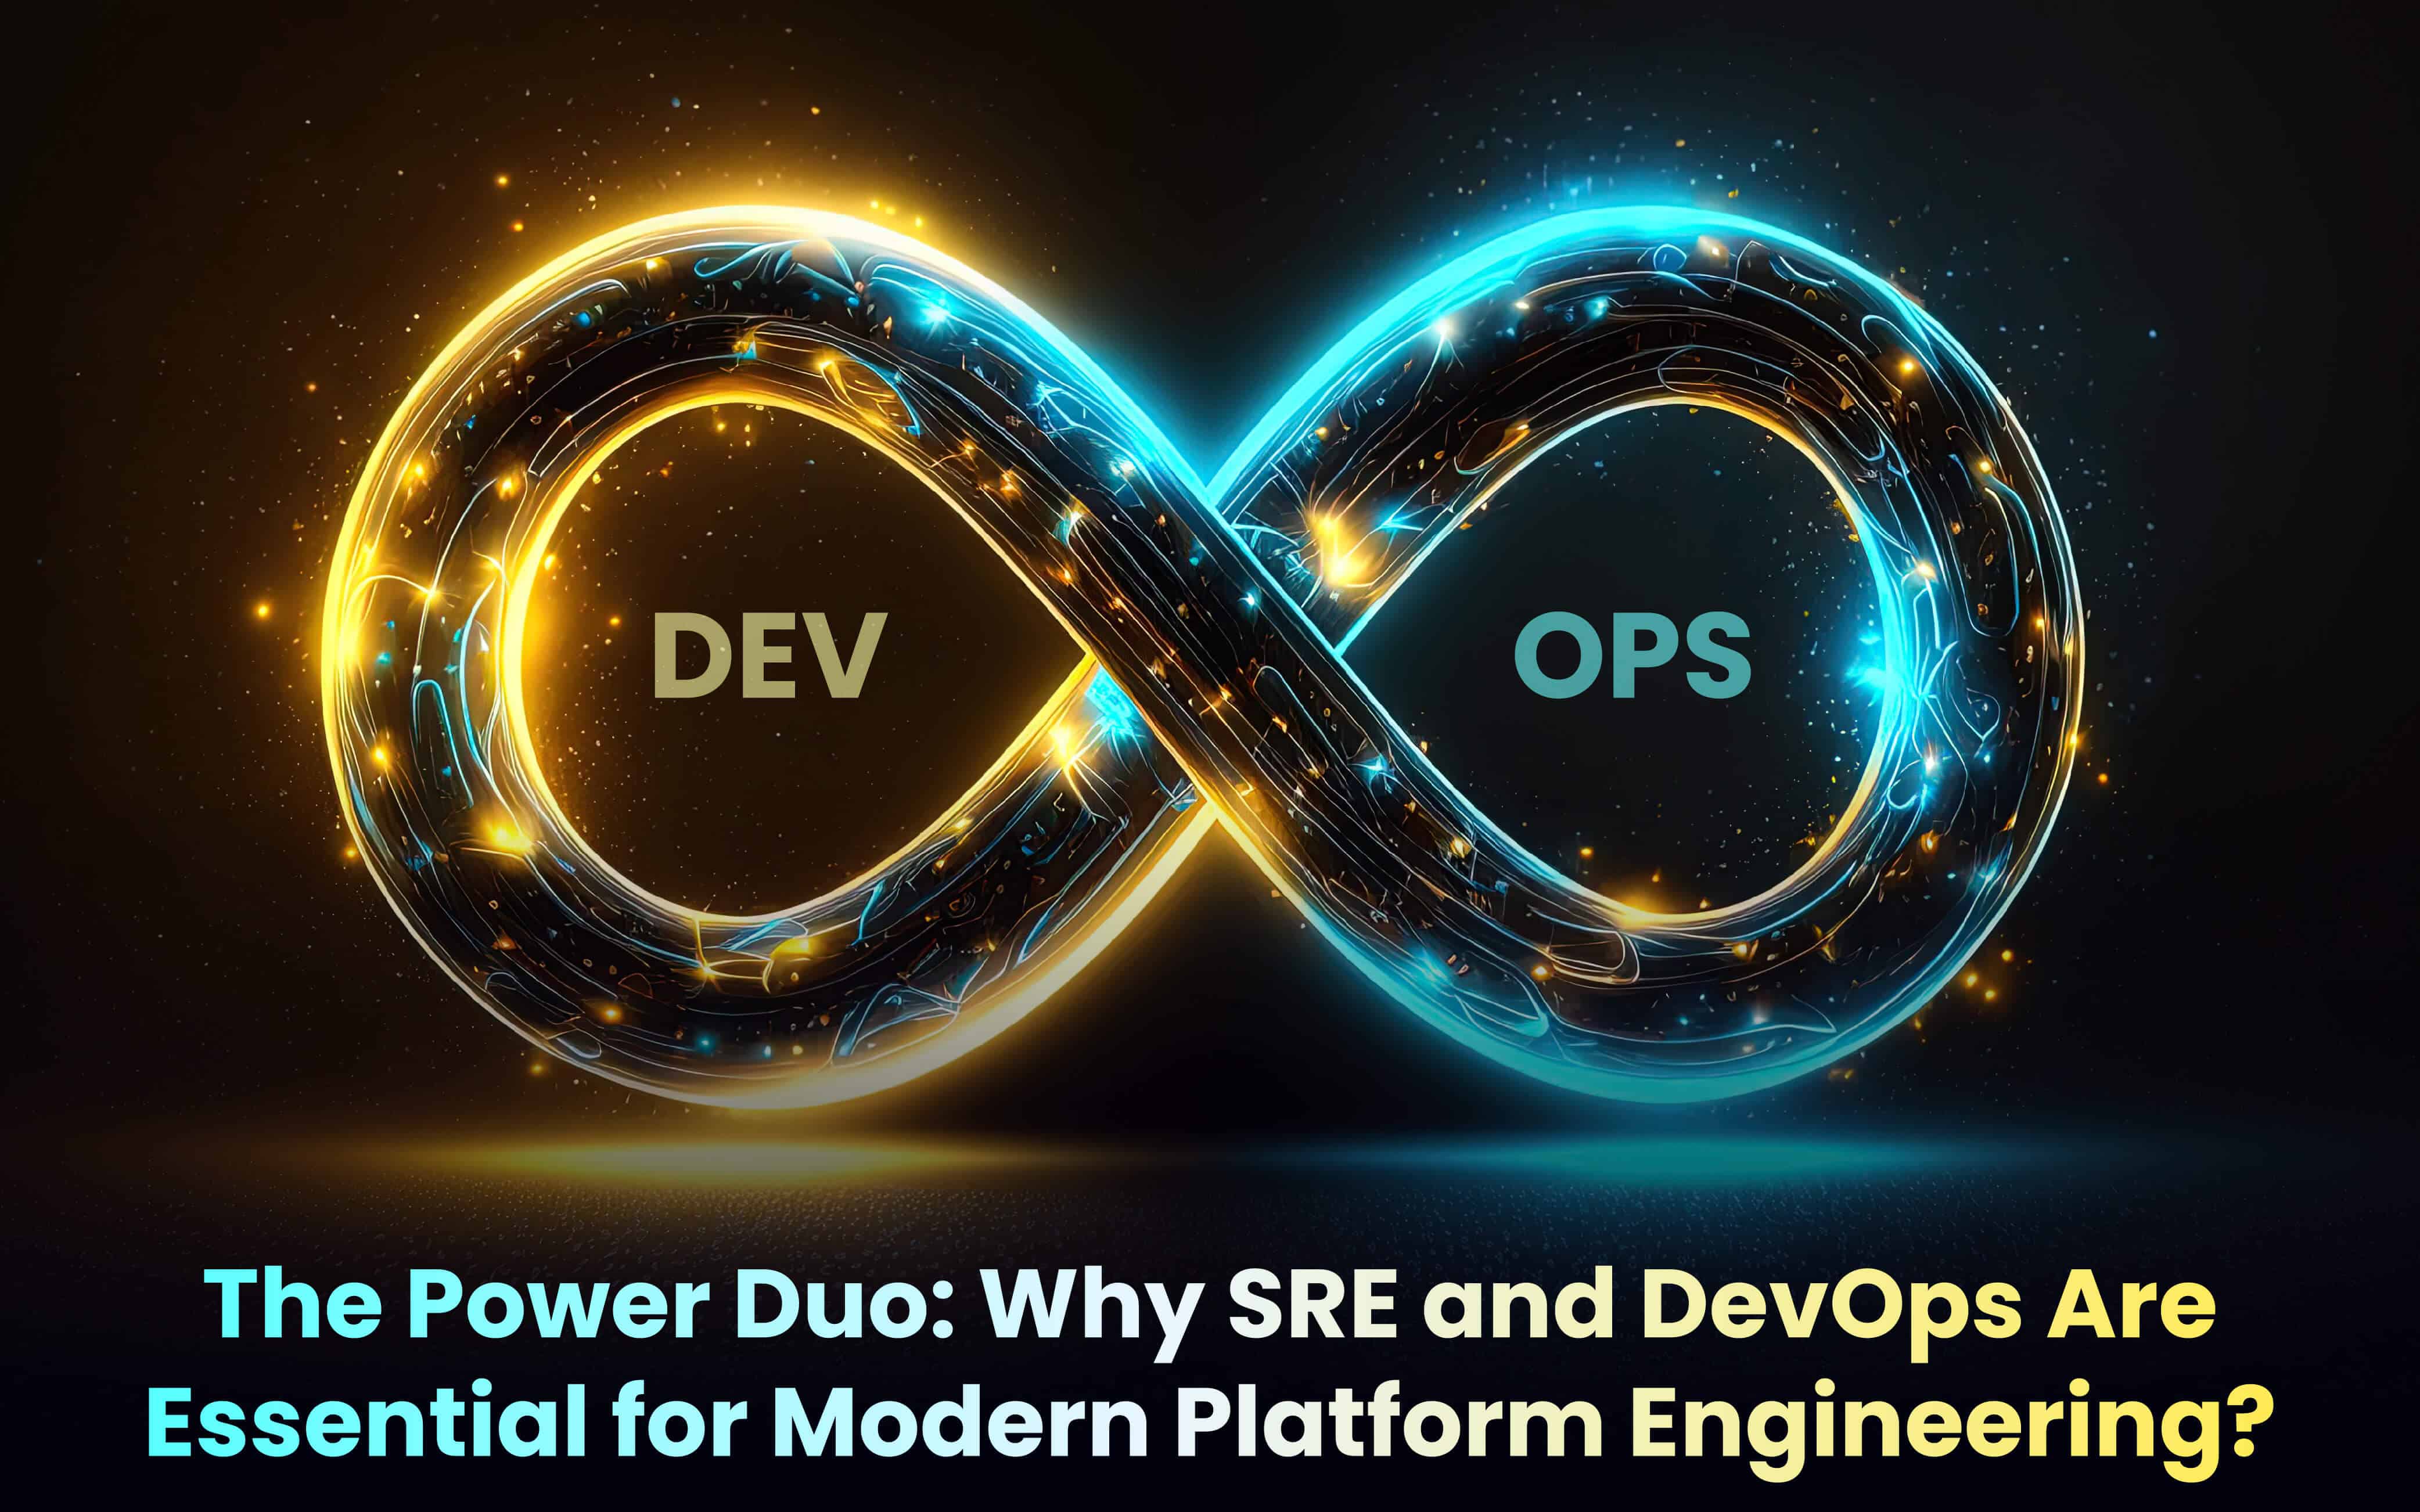 The Power Duo: Why SRE and DevOps Are Essential for Modern Platform Engineering?